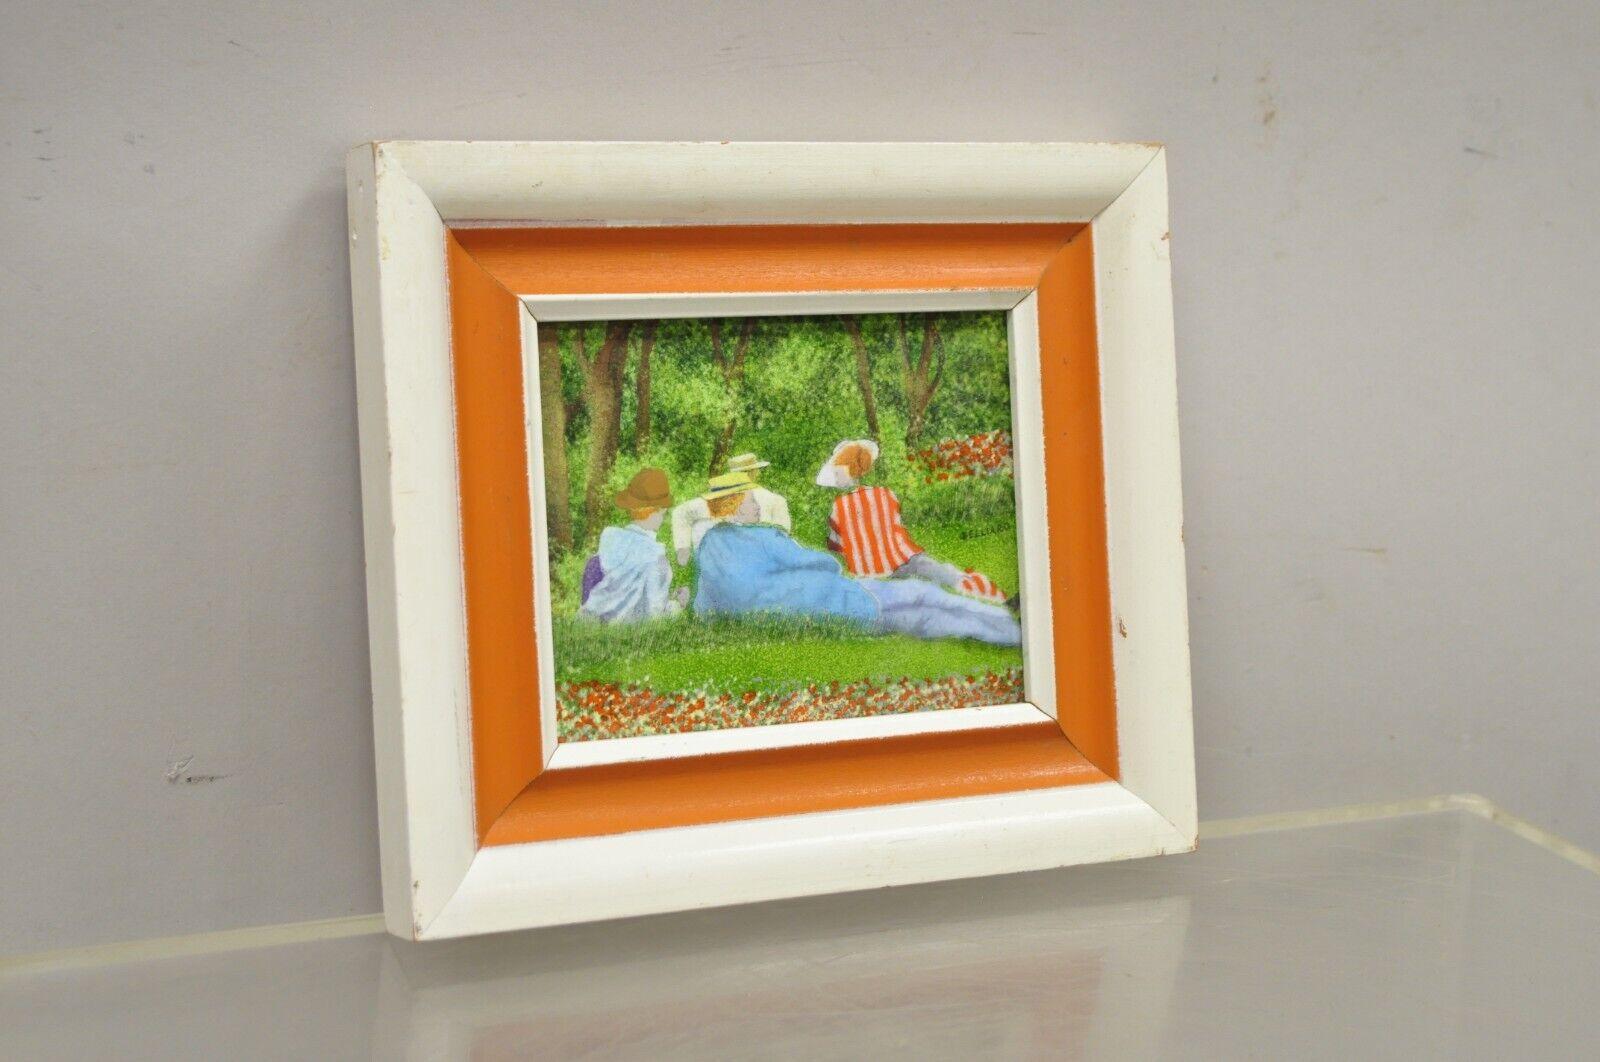 Daniel Belliard Enamel on copper small framed painting friends lounging in grass. Item features an Enamel on copper painting, wooden frame, artist signature to bottom right corner, beautiful subject and color. Circa Late 20th Century.
Measurements: